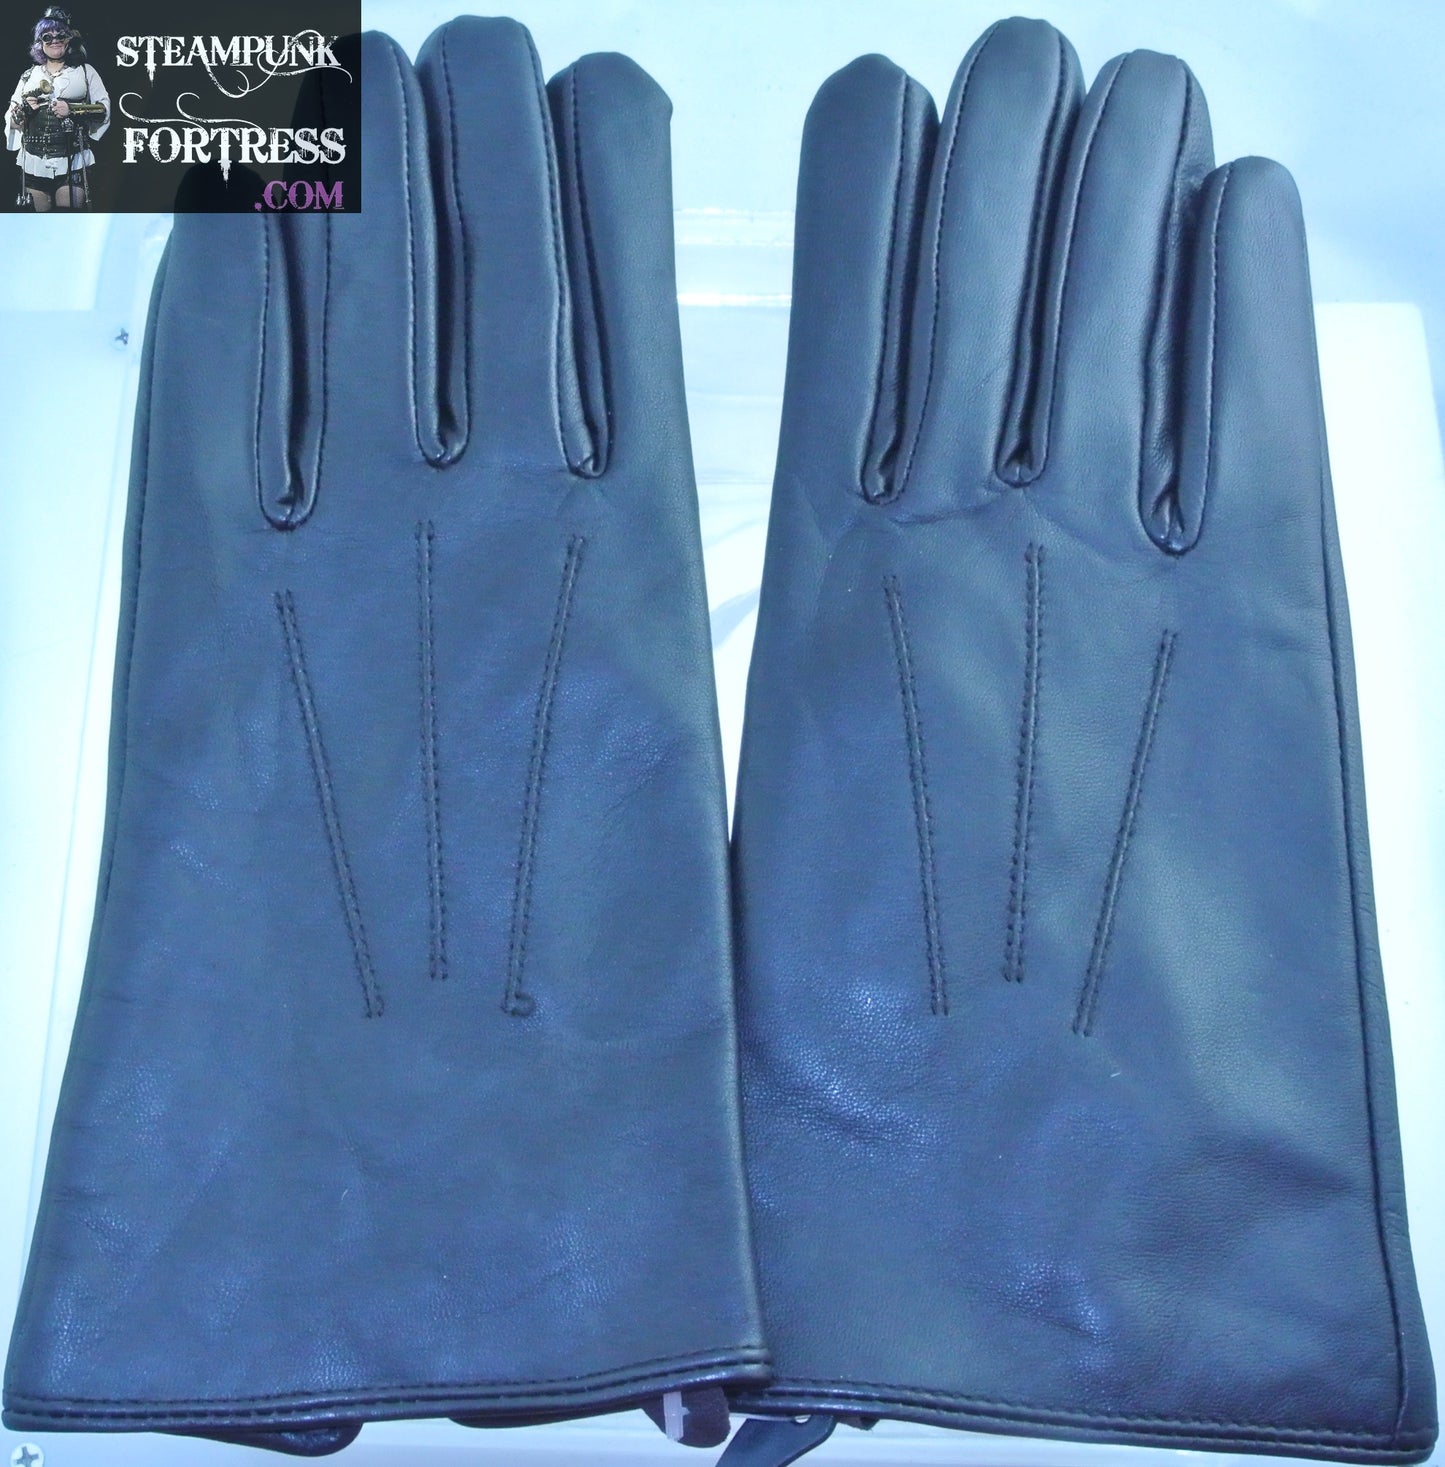 NEW DARK BROWN NEARLY BLACK LEATHER GLOVES MEDIUM LARGE REDFISH - MASS PRODUCED